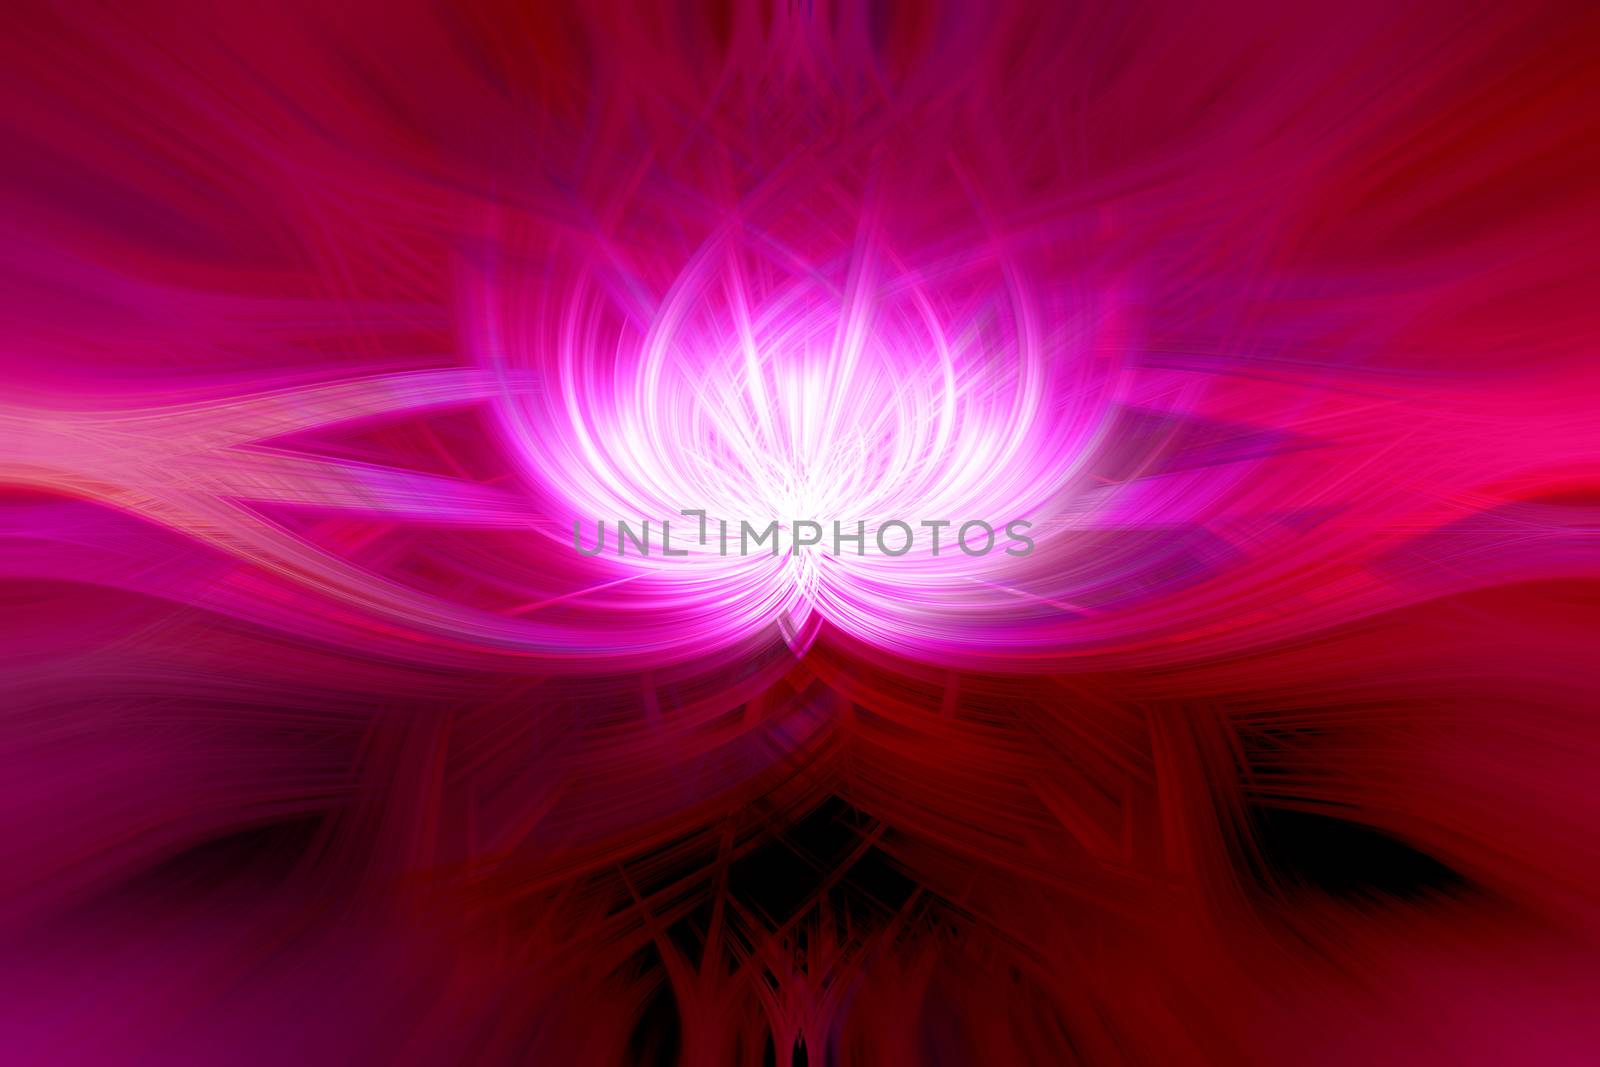 Beautiful abstract intertwined 3d fibers forming a shape of a flower or flame. Purple, red and pink colors. Symmetrical illustration.